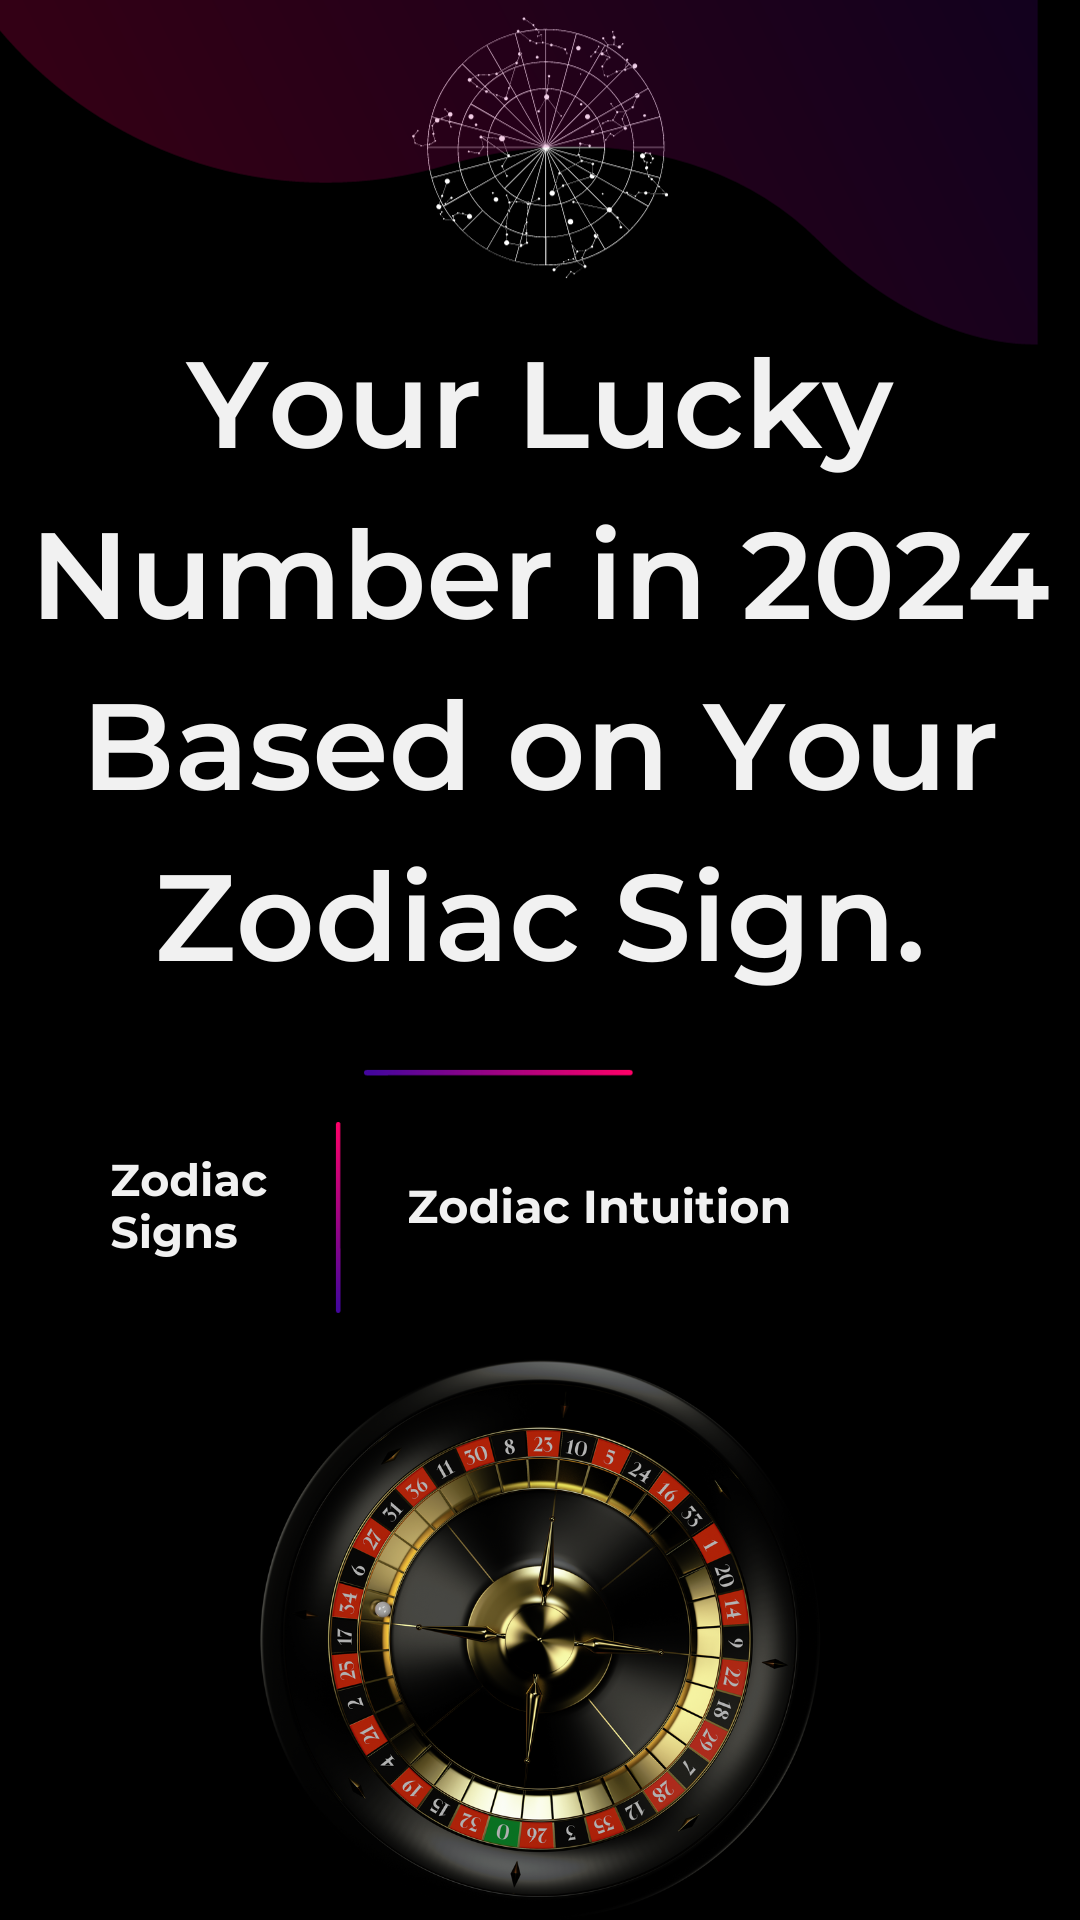 Your Lucky Number in 2024 Based on Your Zodiac Sign.